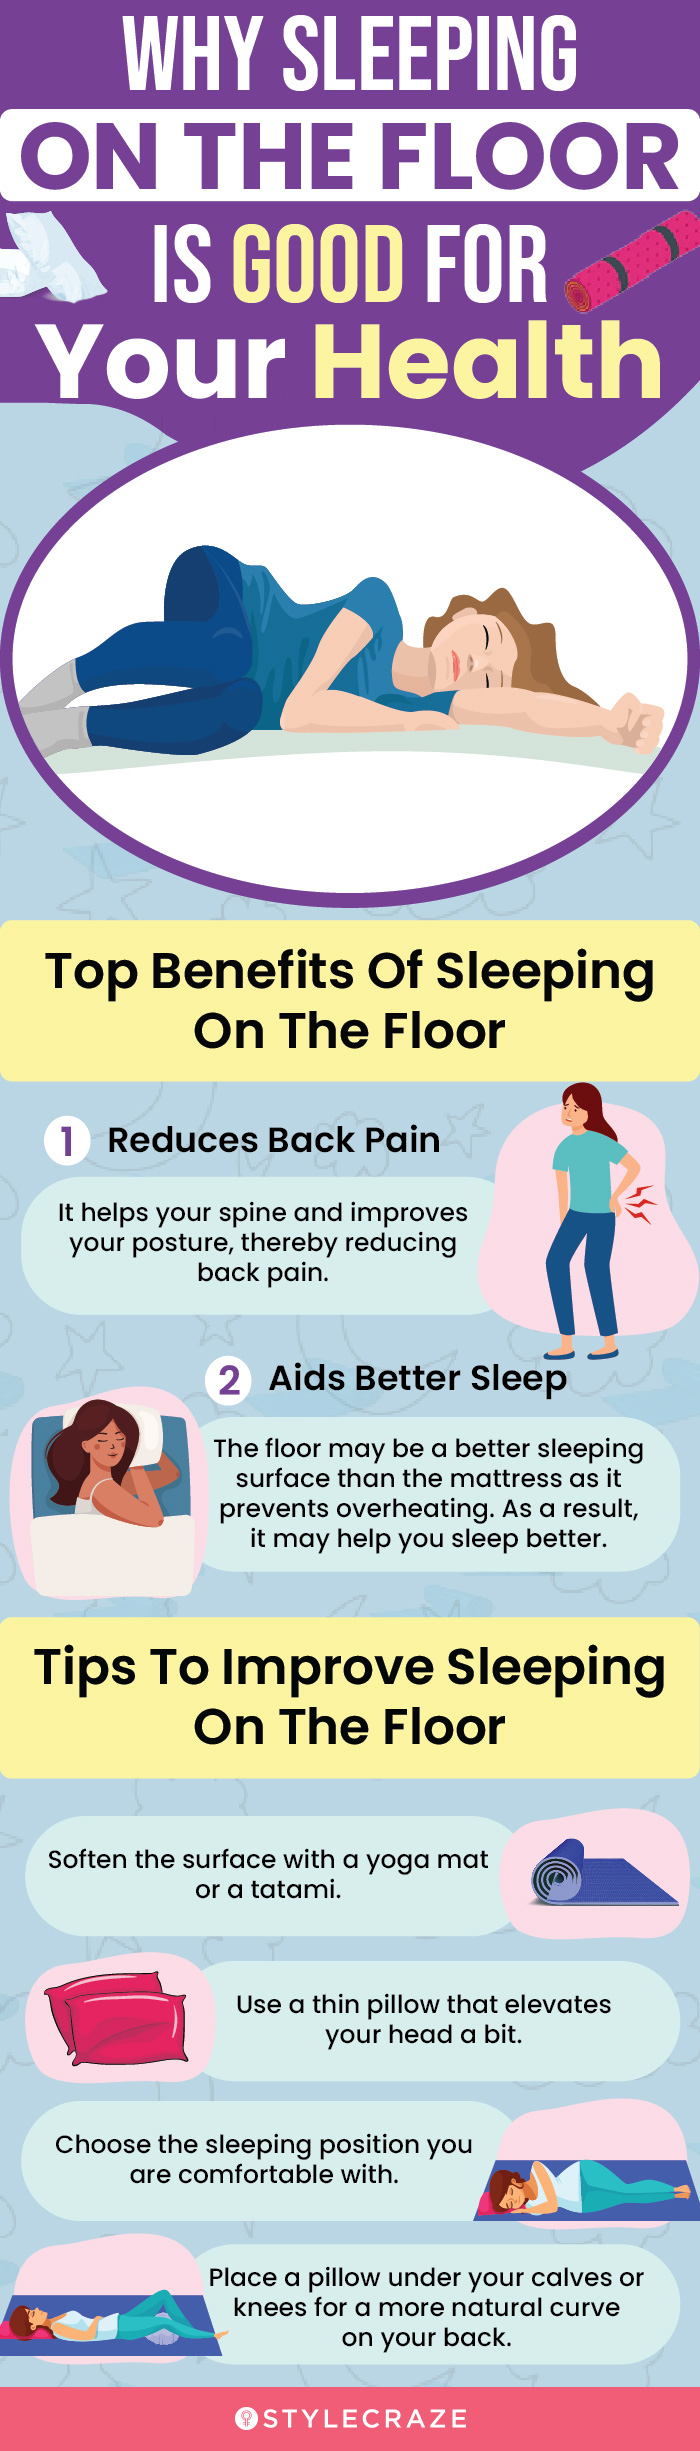 is sleeping on the floor good for your back?